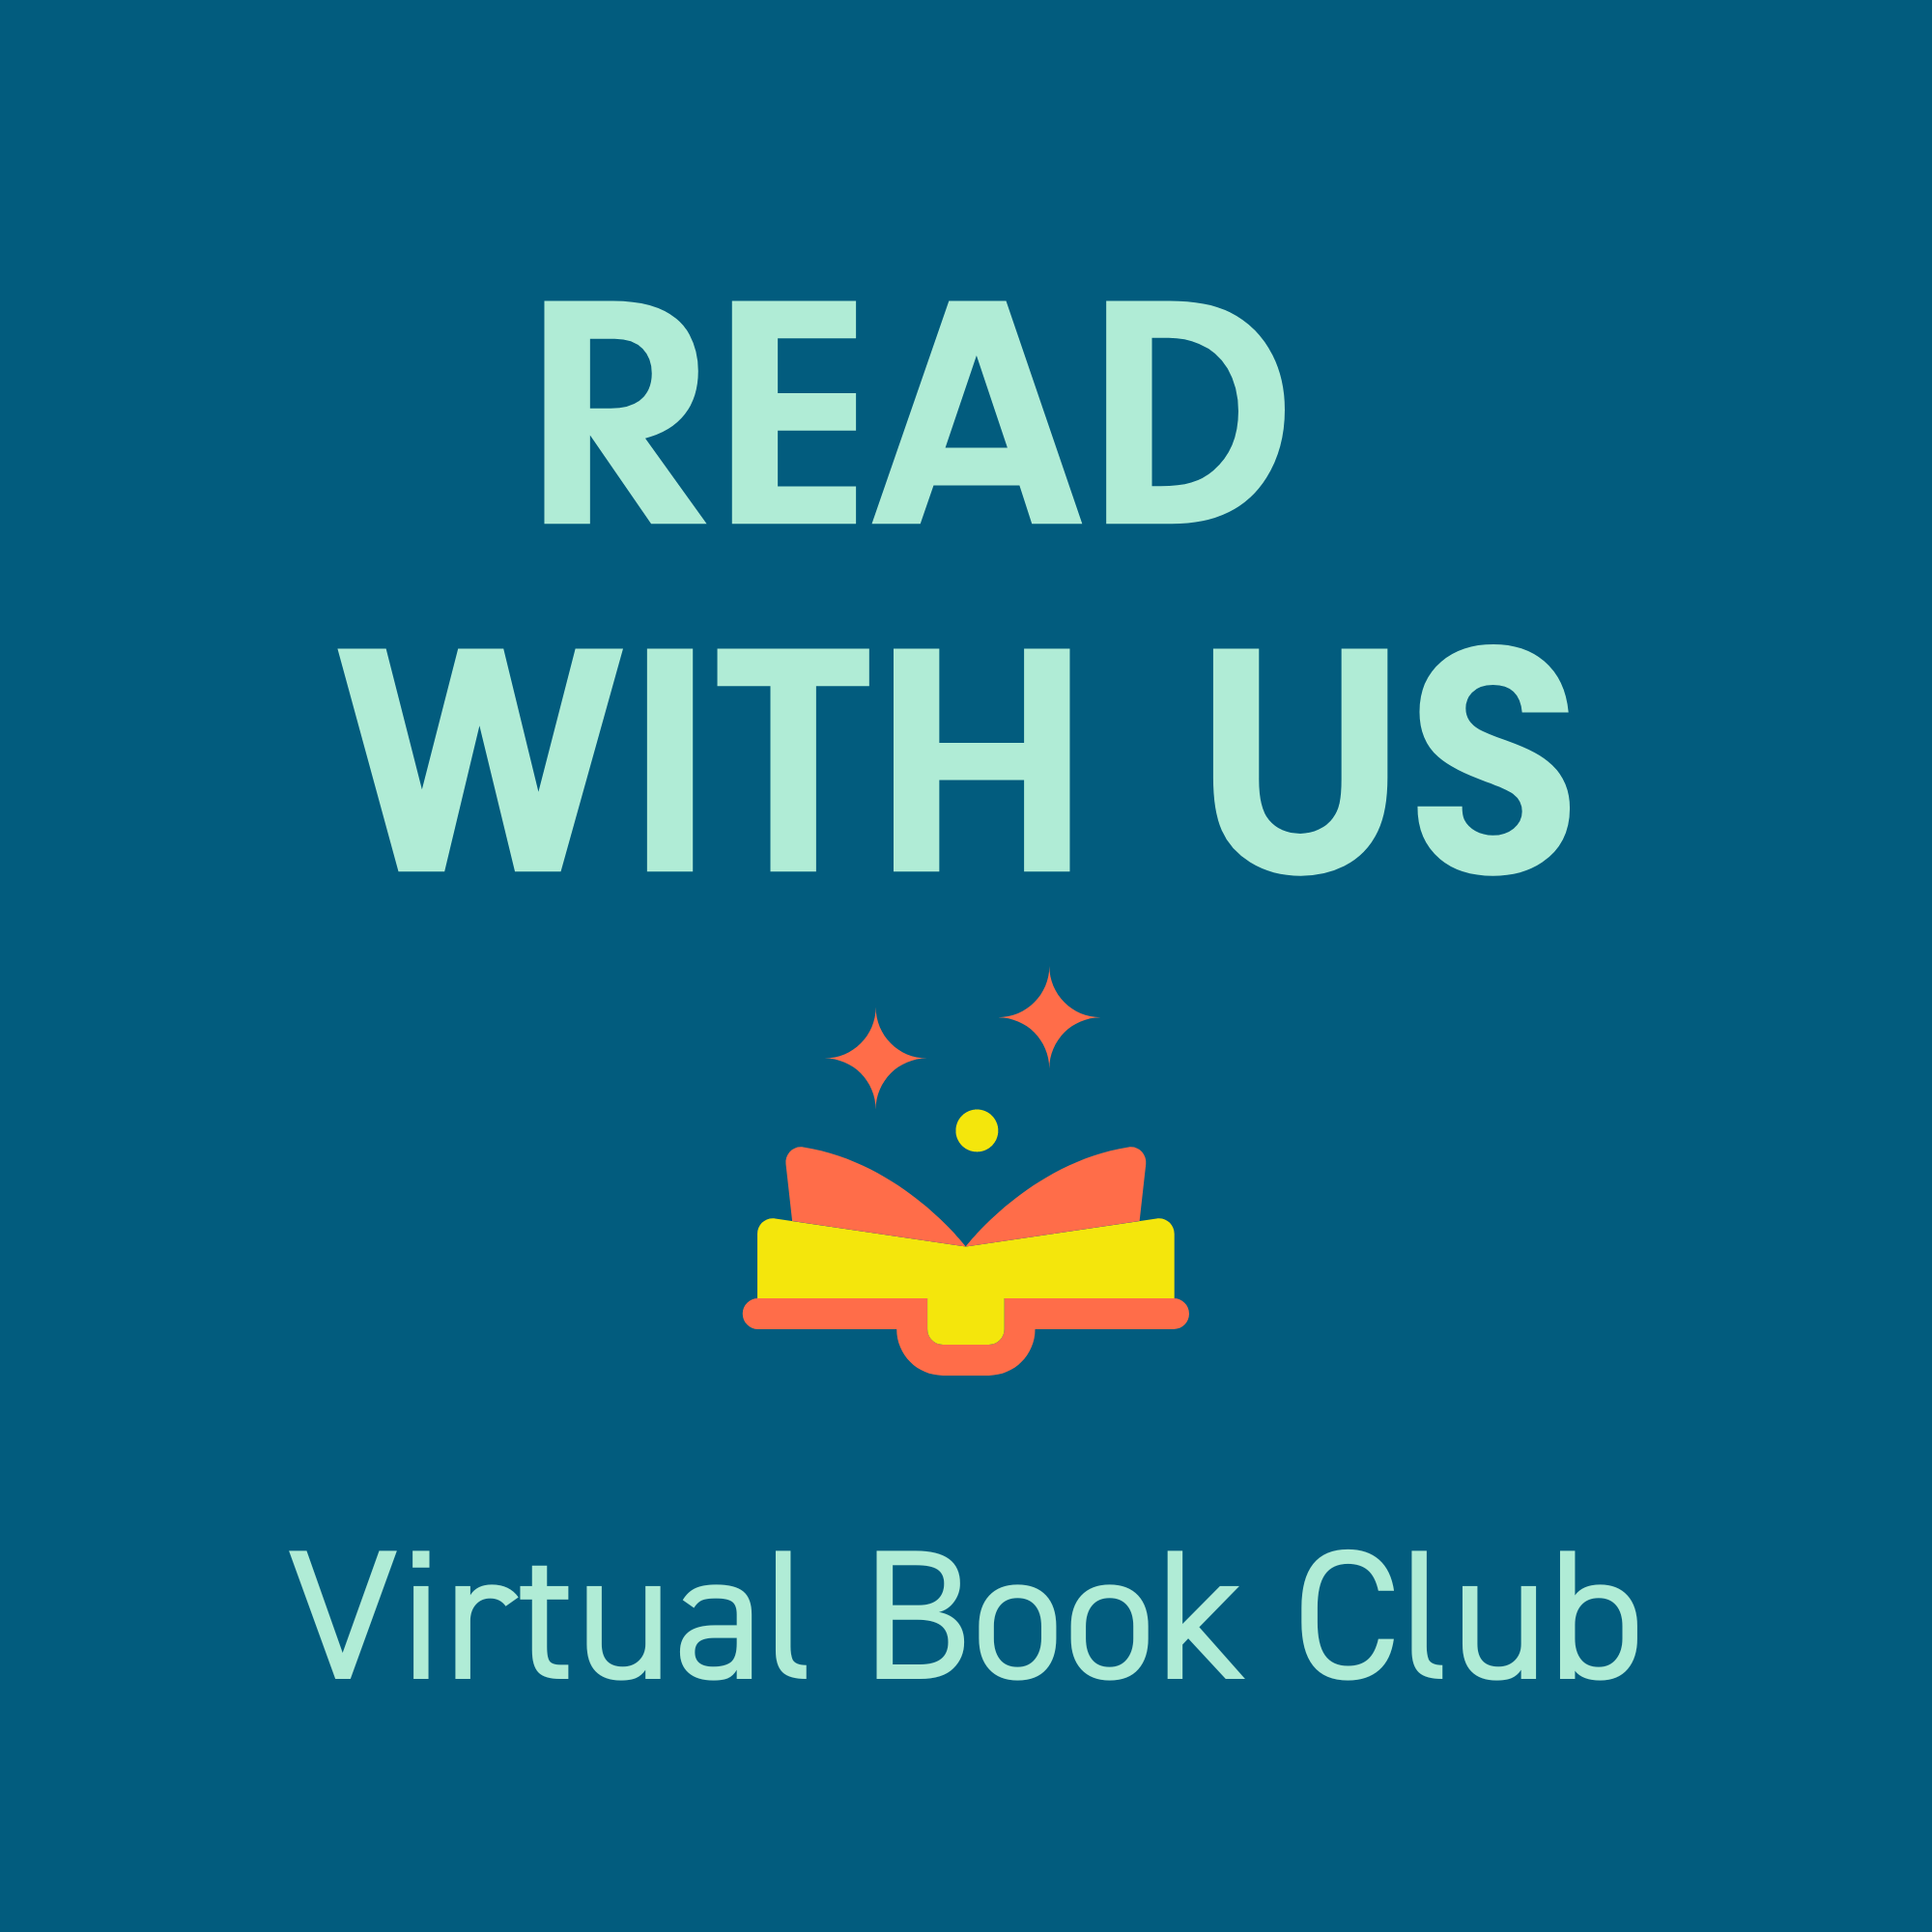 A graphic image on a dark blue background with light blue text that says READ WITH US Virtual Book Club